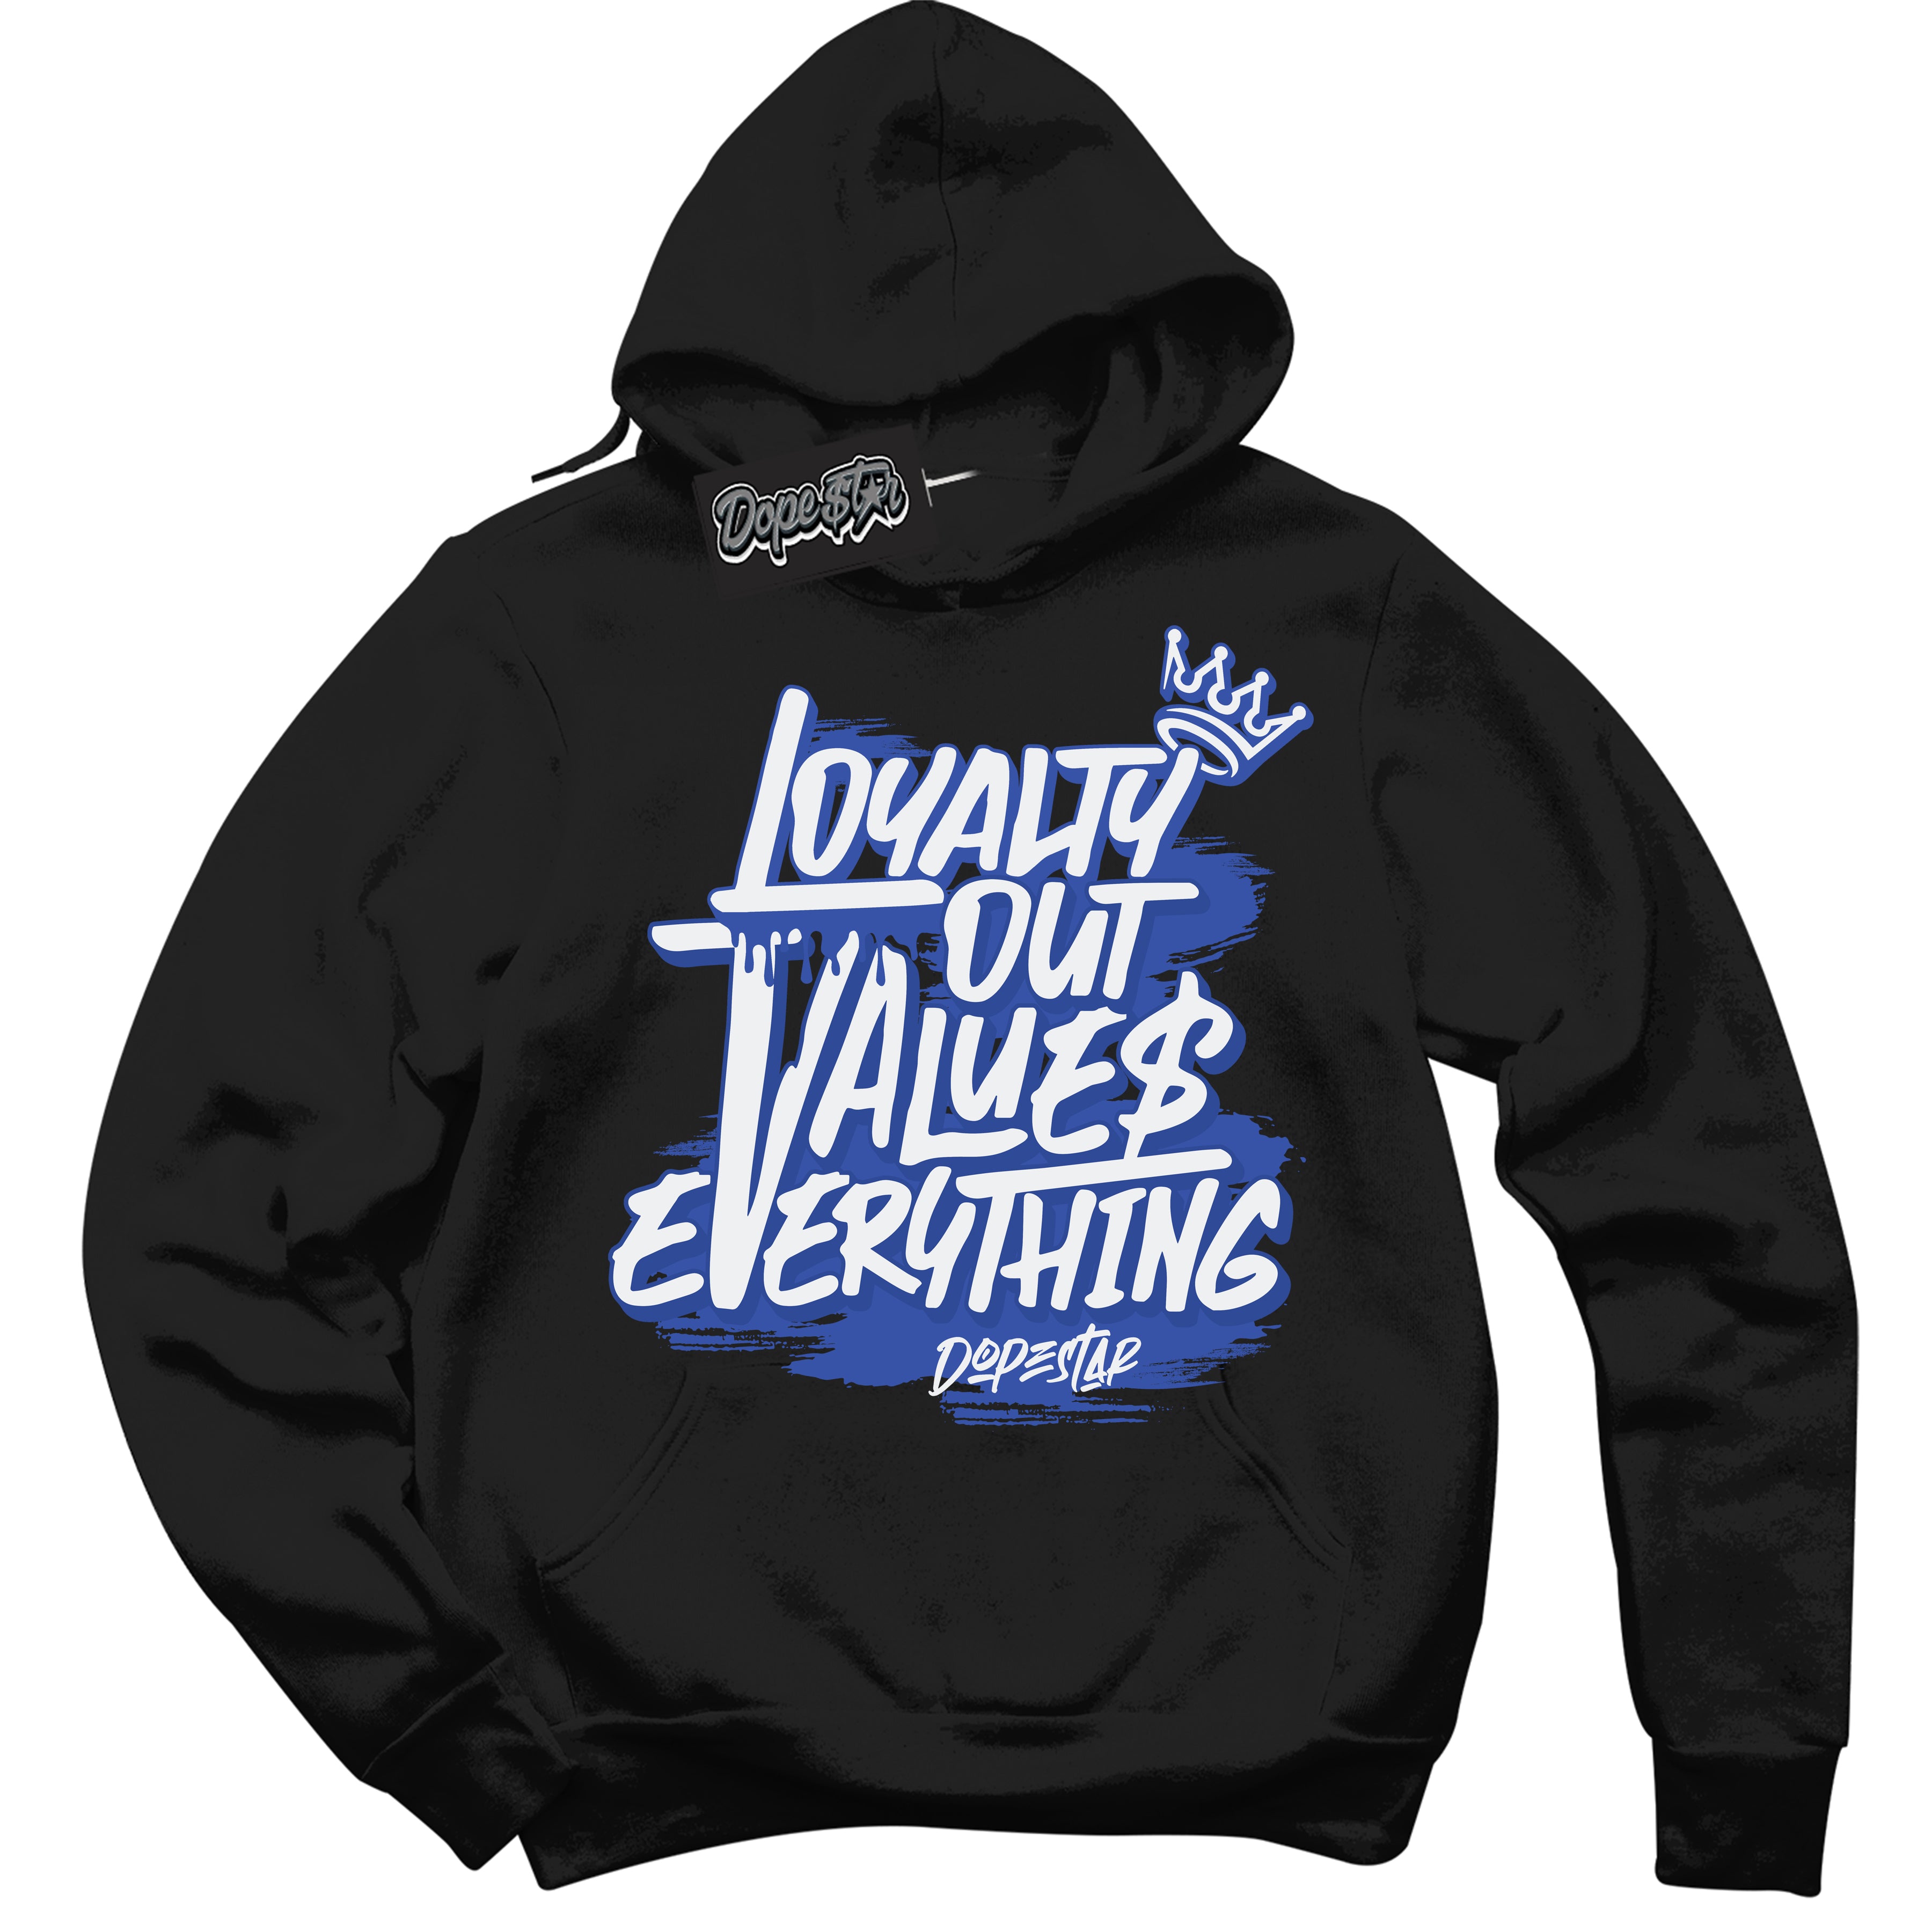 Cool Black Hoodie with “ Loyalty Out Values Everything ”  design that Perfectly Matches  Racer Blue Photon Dust Sneakers.